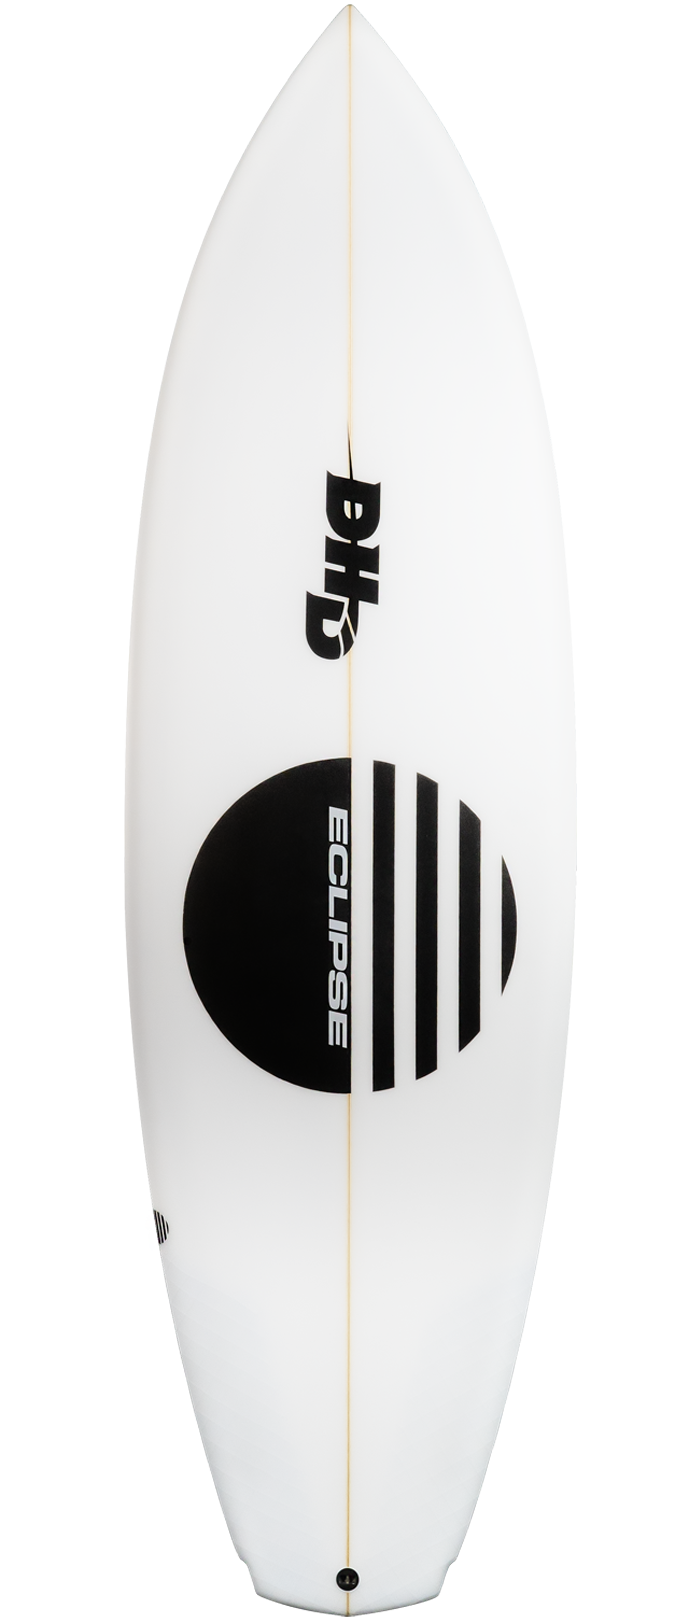 Surfboards – DHD Surf